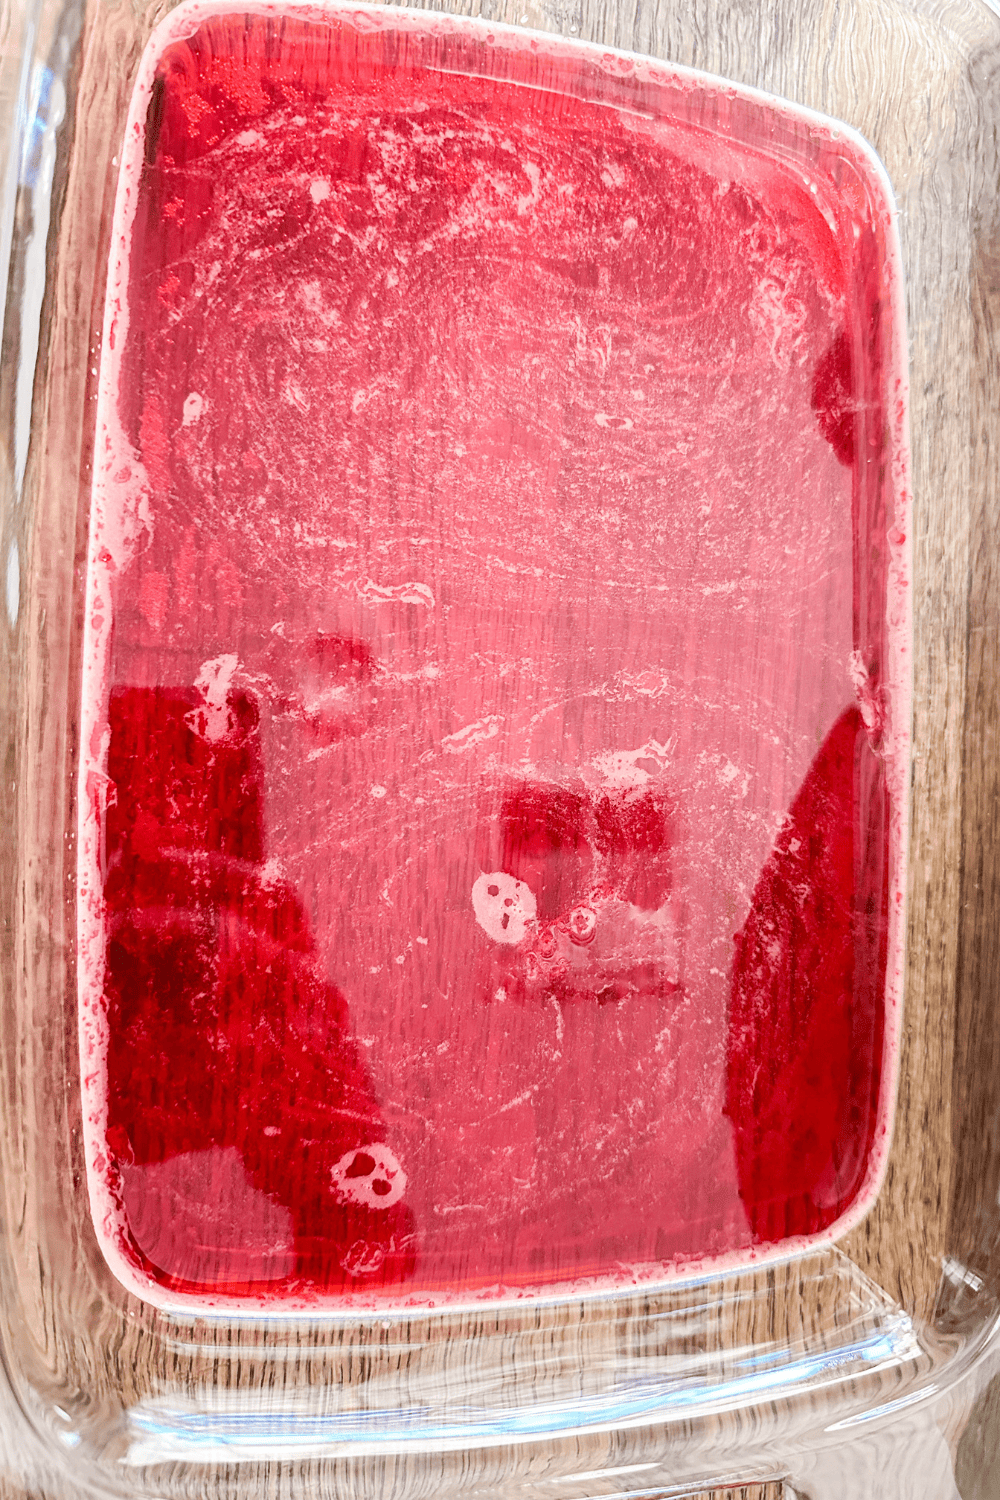 red jello in a glass tray